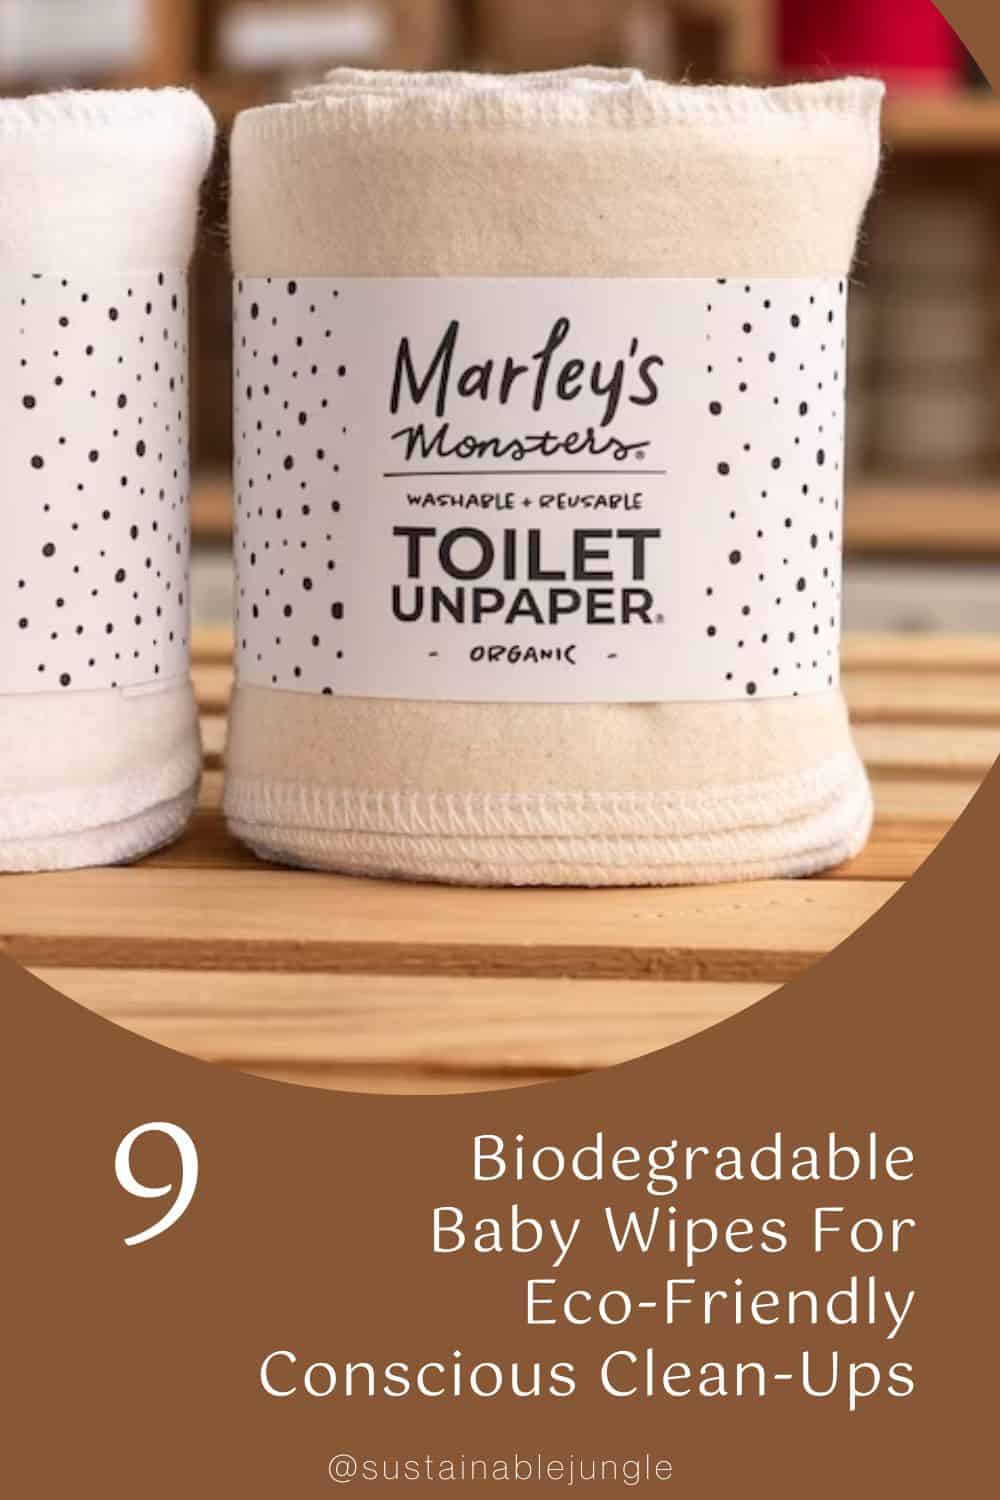 9 Biodegradable Baby Wipes For Eco-Friendly Conscious Clean-Ups Image by Marley’s Monsters #biodegradablebabywipes #arebabywipesbiodegradable #biodegradablewipesbaby #ecofriendlybabywipes #bestecofriendlybabywipes #ecofriendlyalternativetobabywipes #sustainablejungle